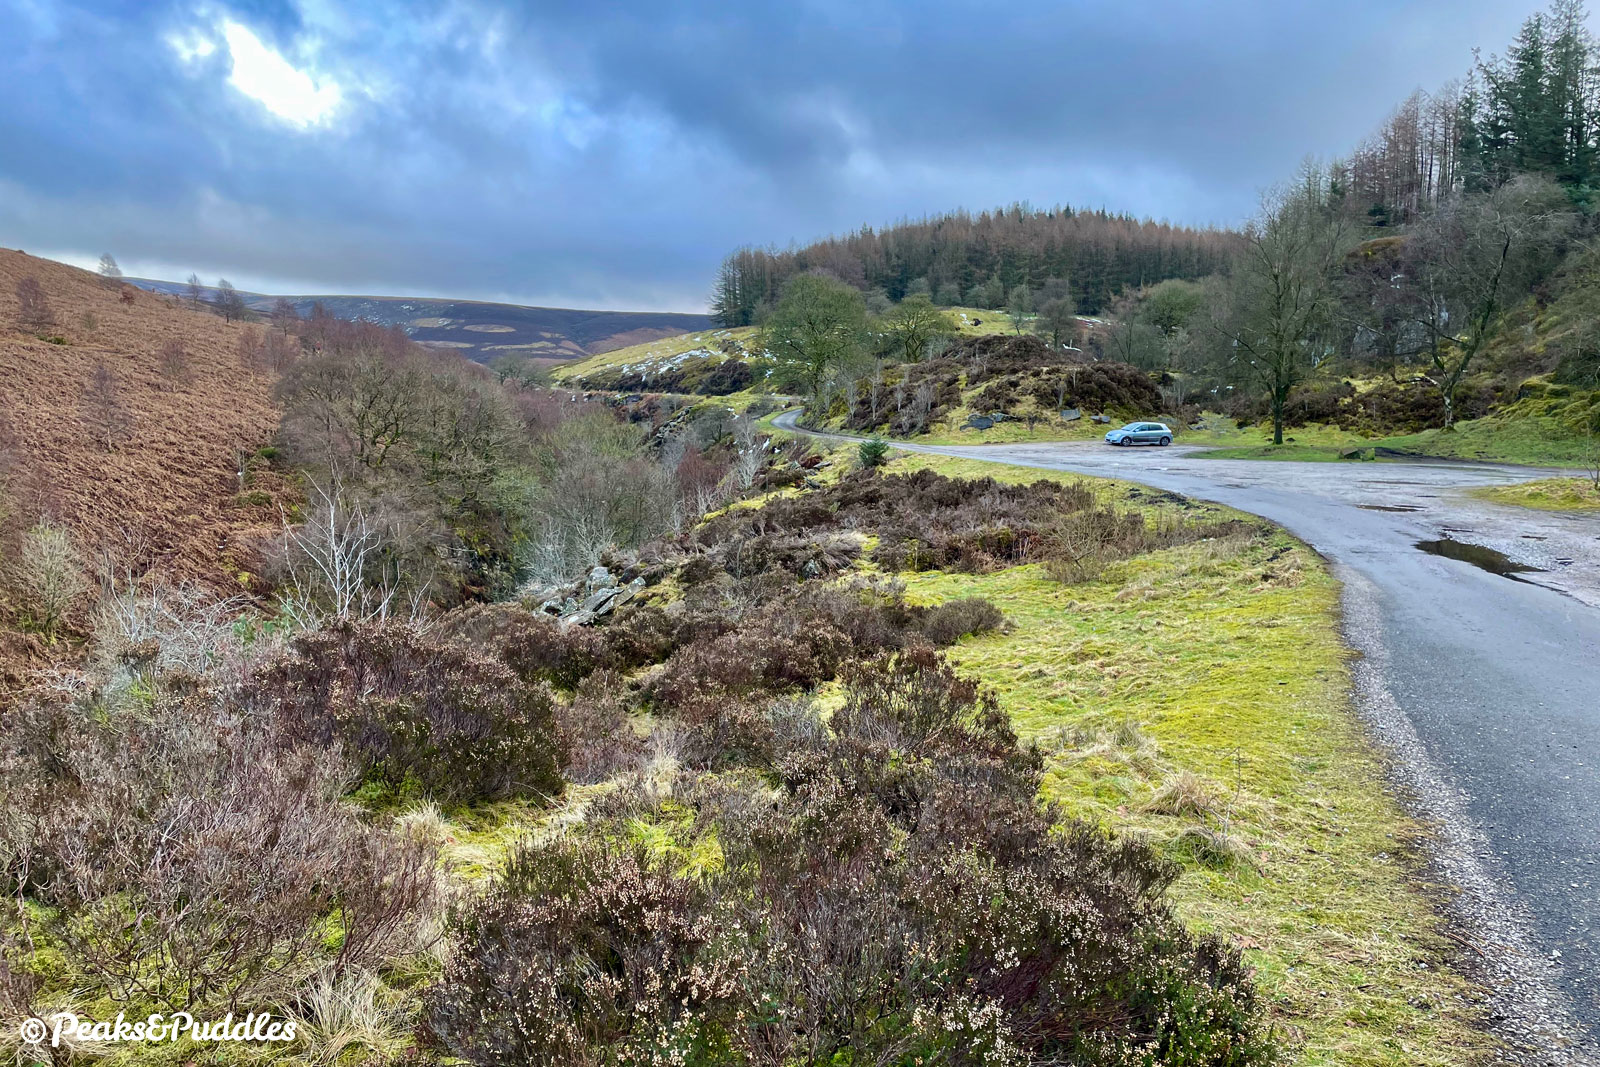 There's no real need for public vehicle access beyond Goytsclough Quarry, and maintaining it on this narrow one-way road means cyclists have been denied this vital “escape route” as a legal two-way route for 40 years.